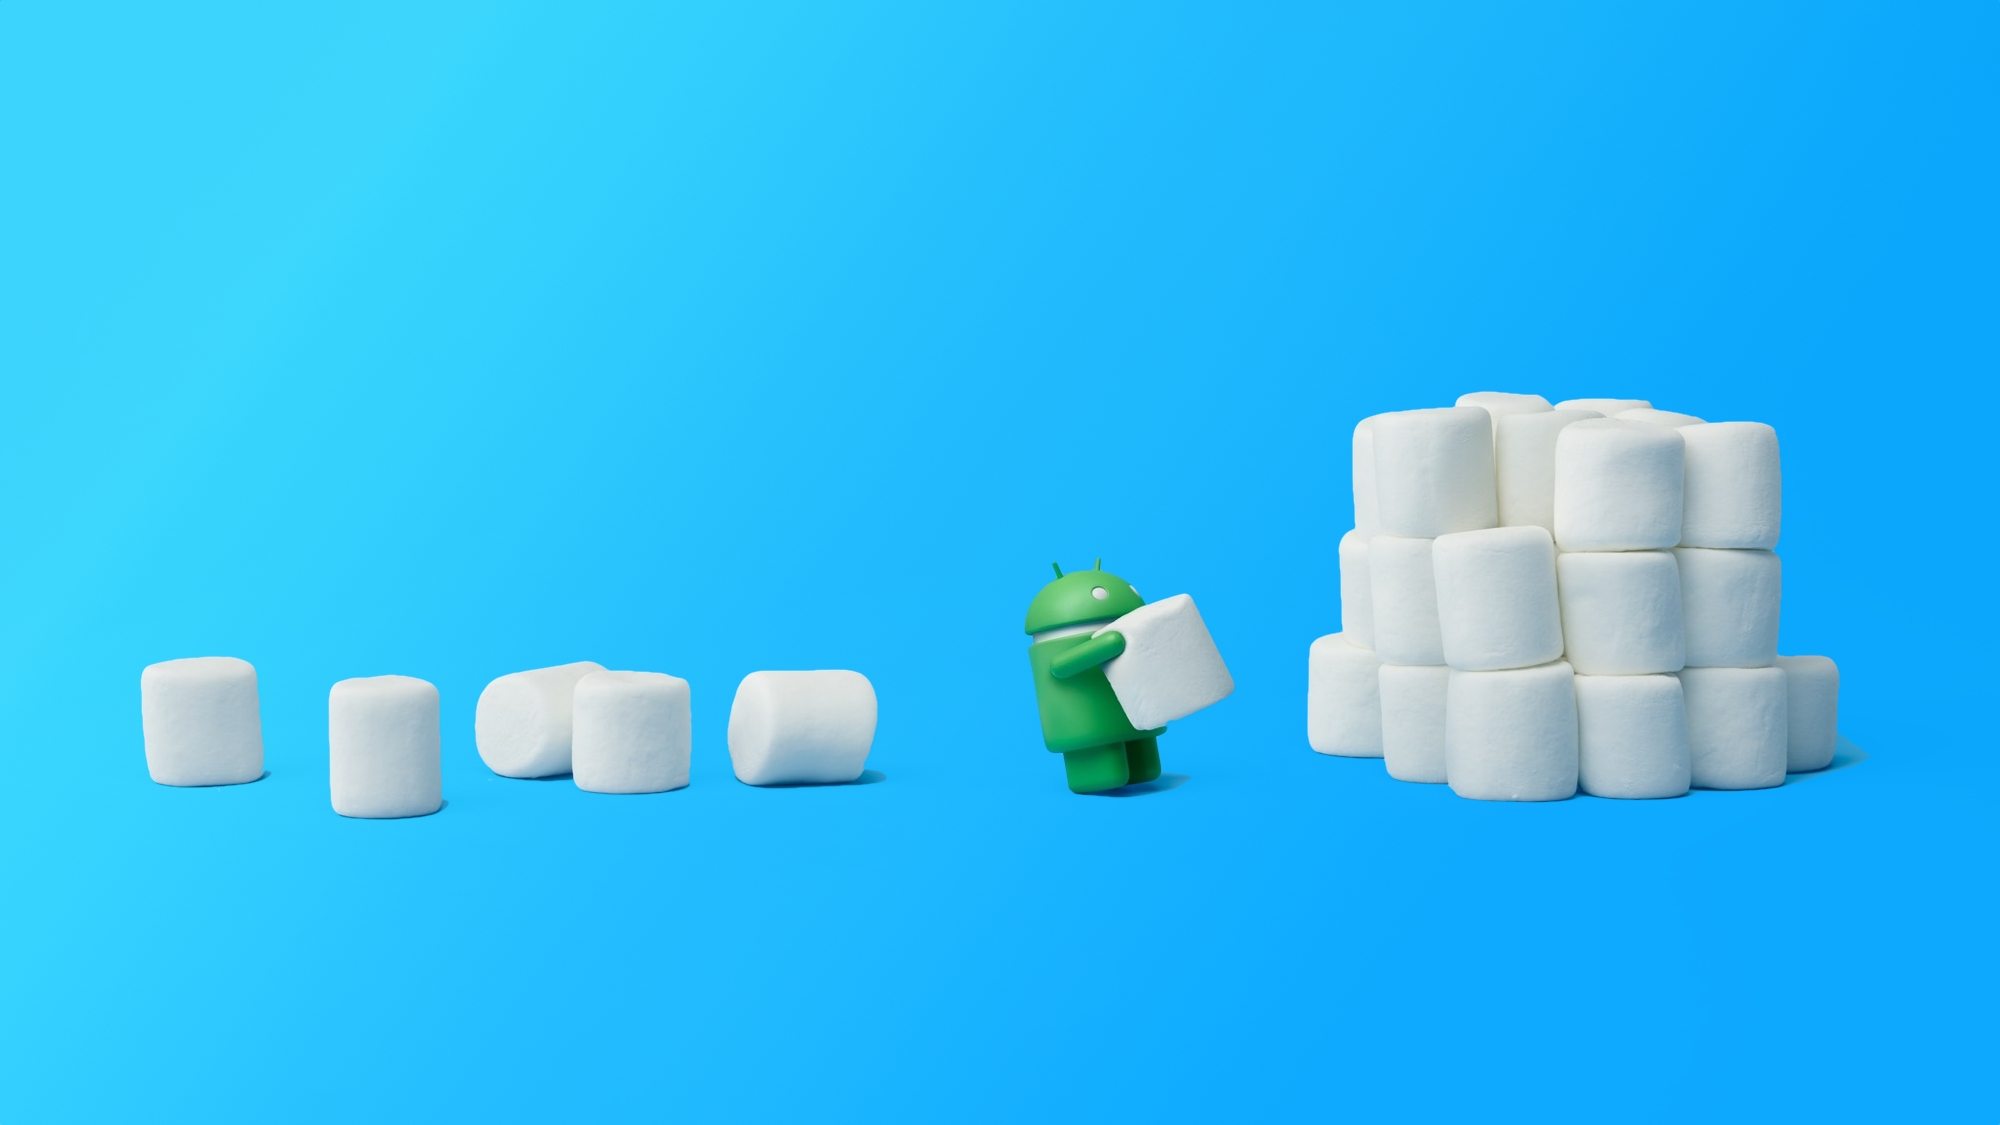 A photo, update android marshmallows on Moto G 3 Gen